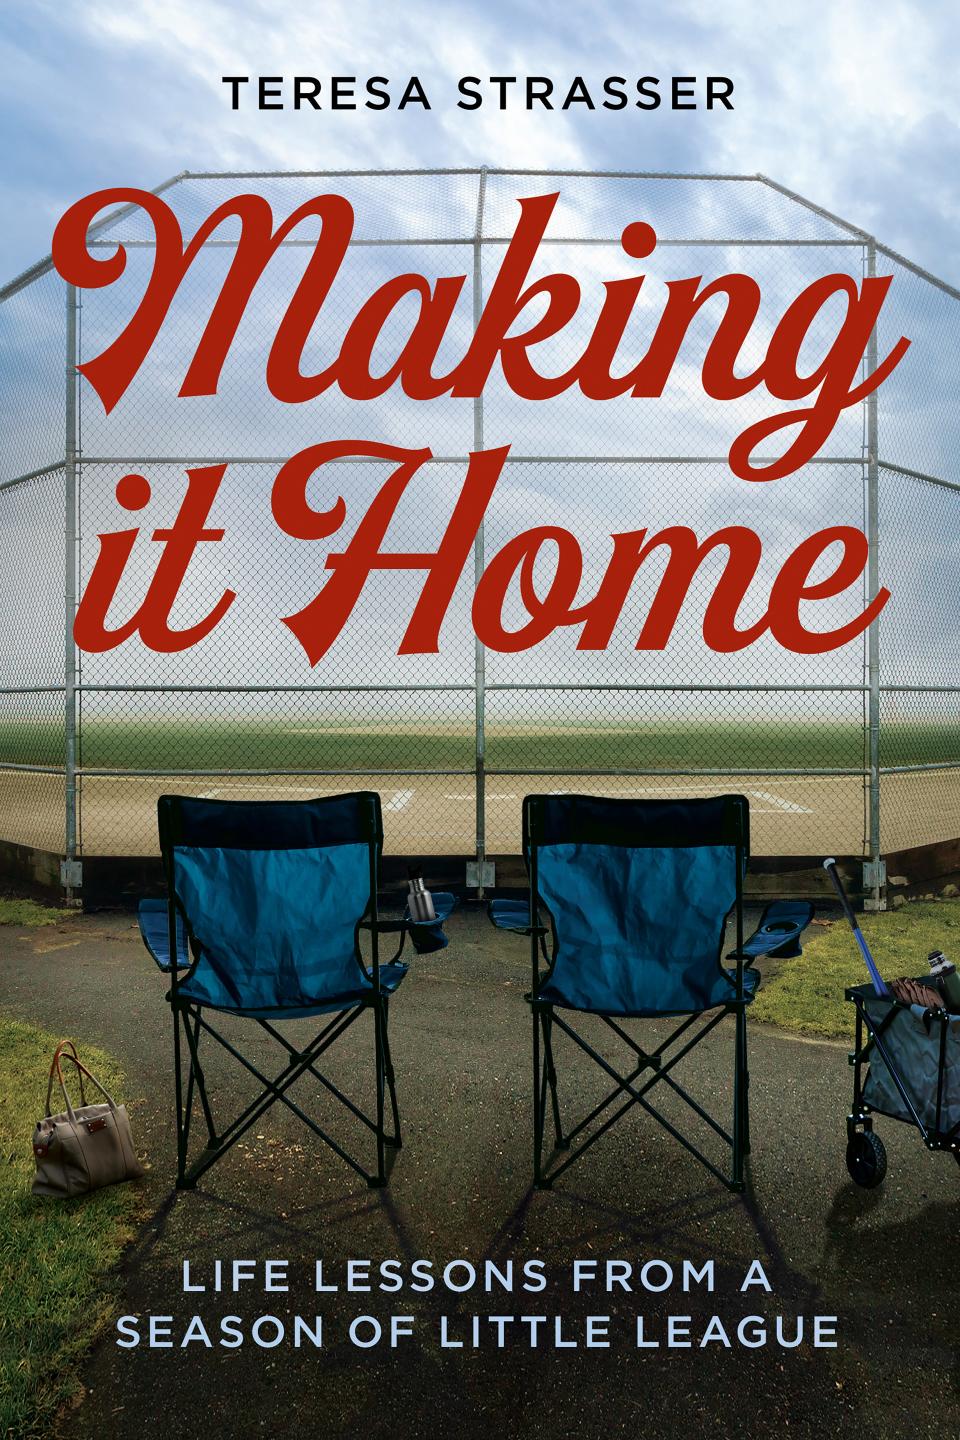 Teresa Strasser discussed her new memoir "Making it Home," out Tuesday.